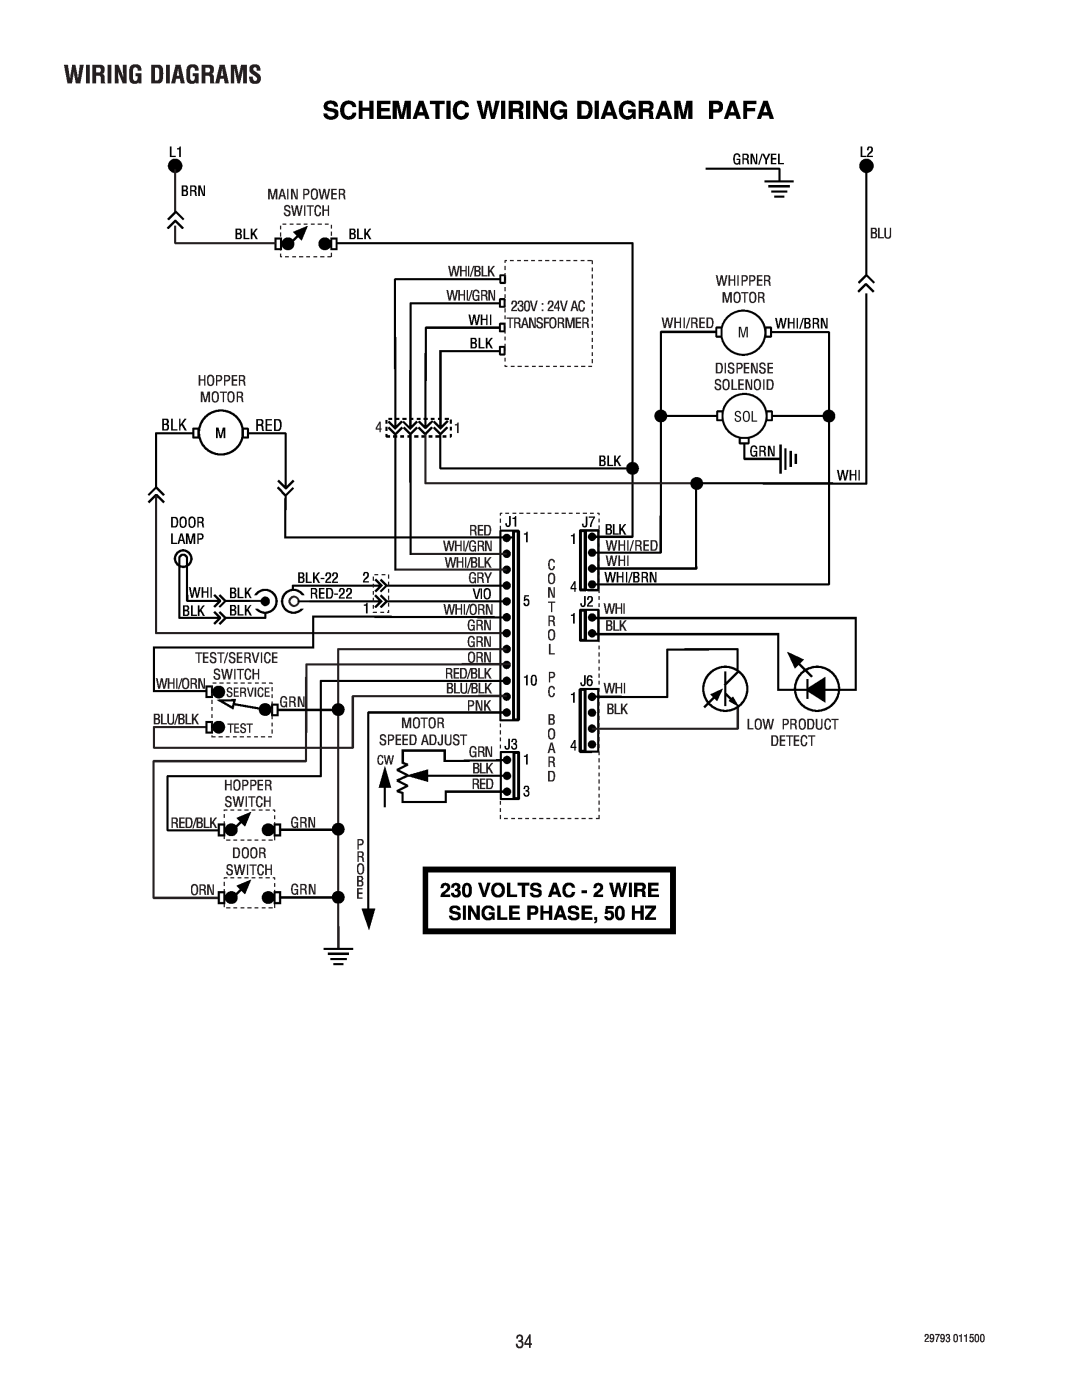 Bunn CDS-3, CDS-2 service manual Schematic Wiring Diagram Pafa, Wiring Diagrams, VOLTS AC - 2 WIRE, SINGLE PHASE, 50 HZ 